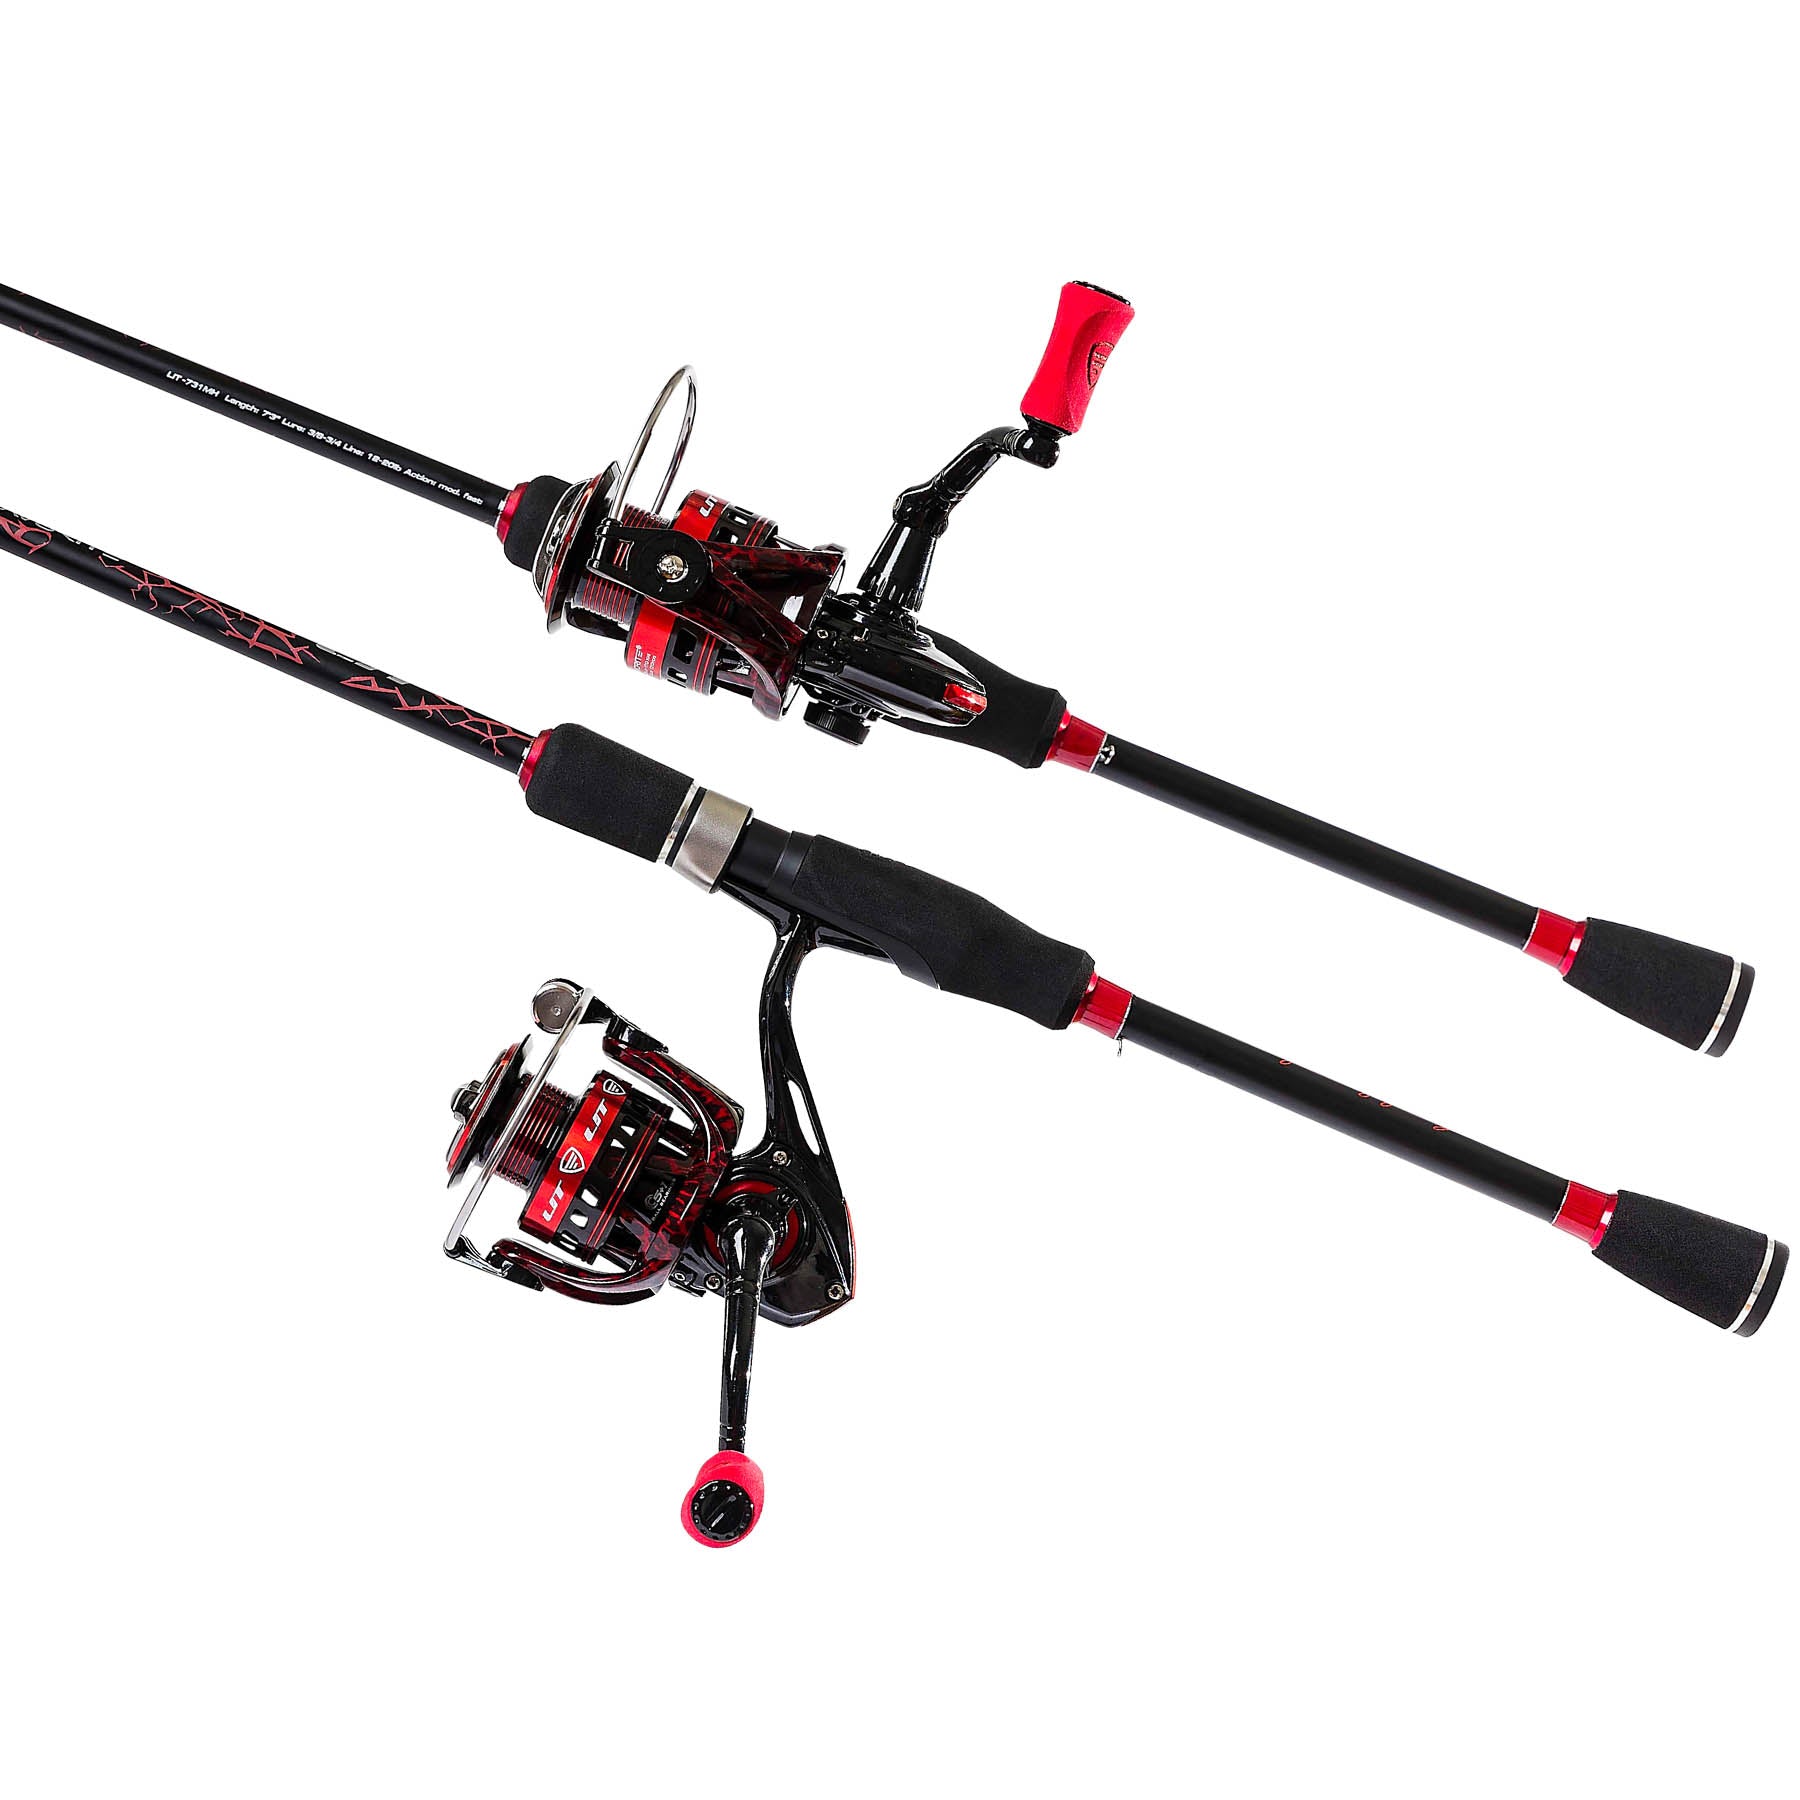 Spincast rod and reel combo will separate - sporting goods - by